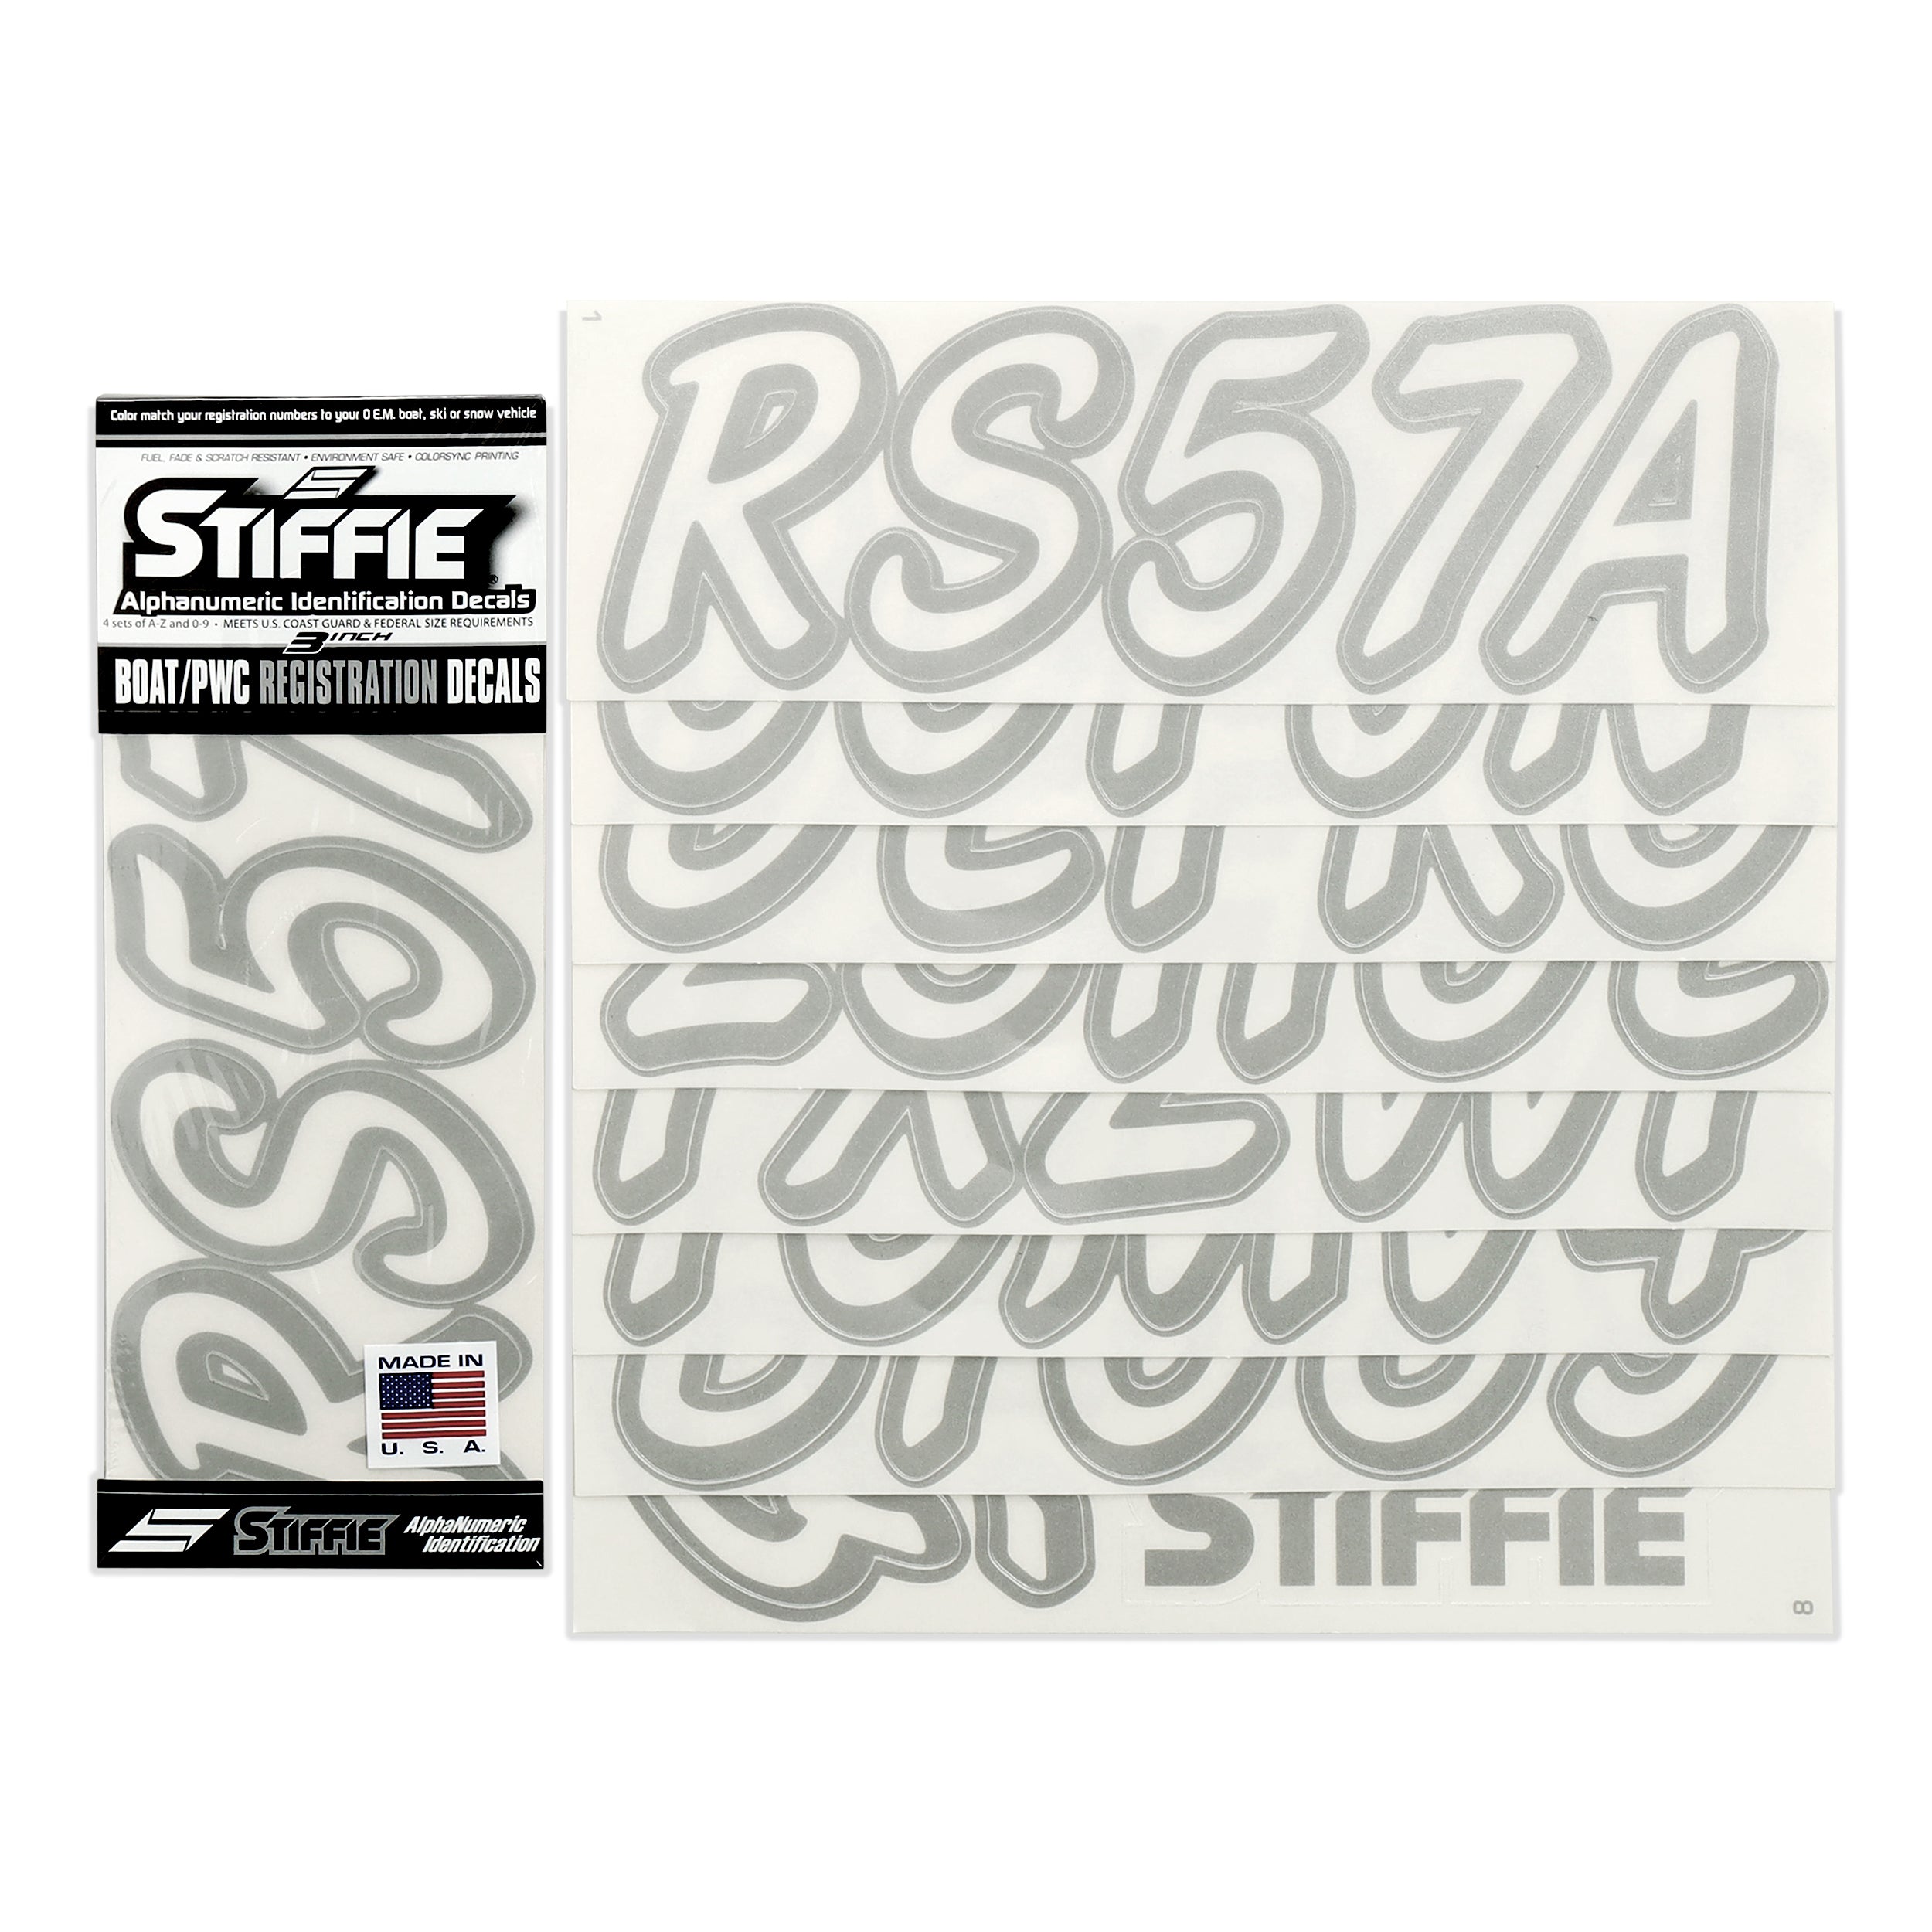 STIFFIE Whipline Solid Transparent/Silver 3" Alpha-Numeric Registration Identification Numbers Stickers Decals for Boats & Personal Watercraft